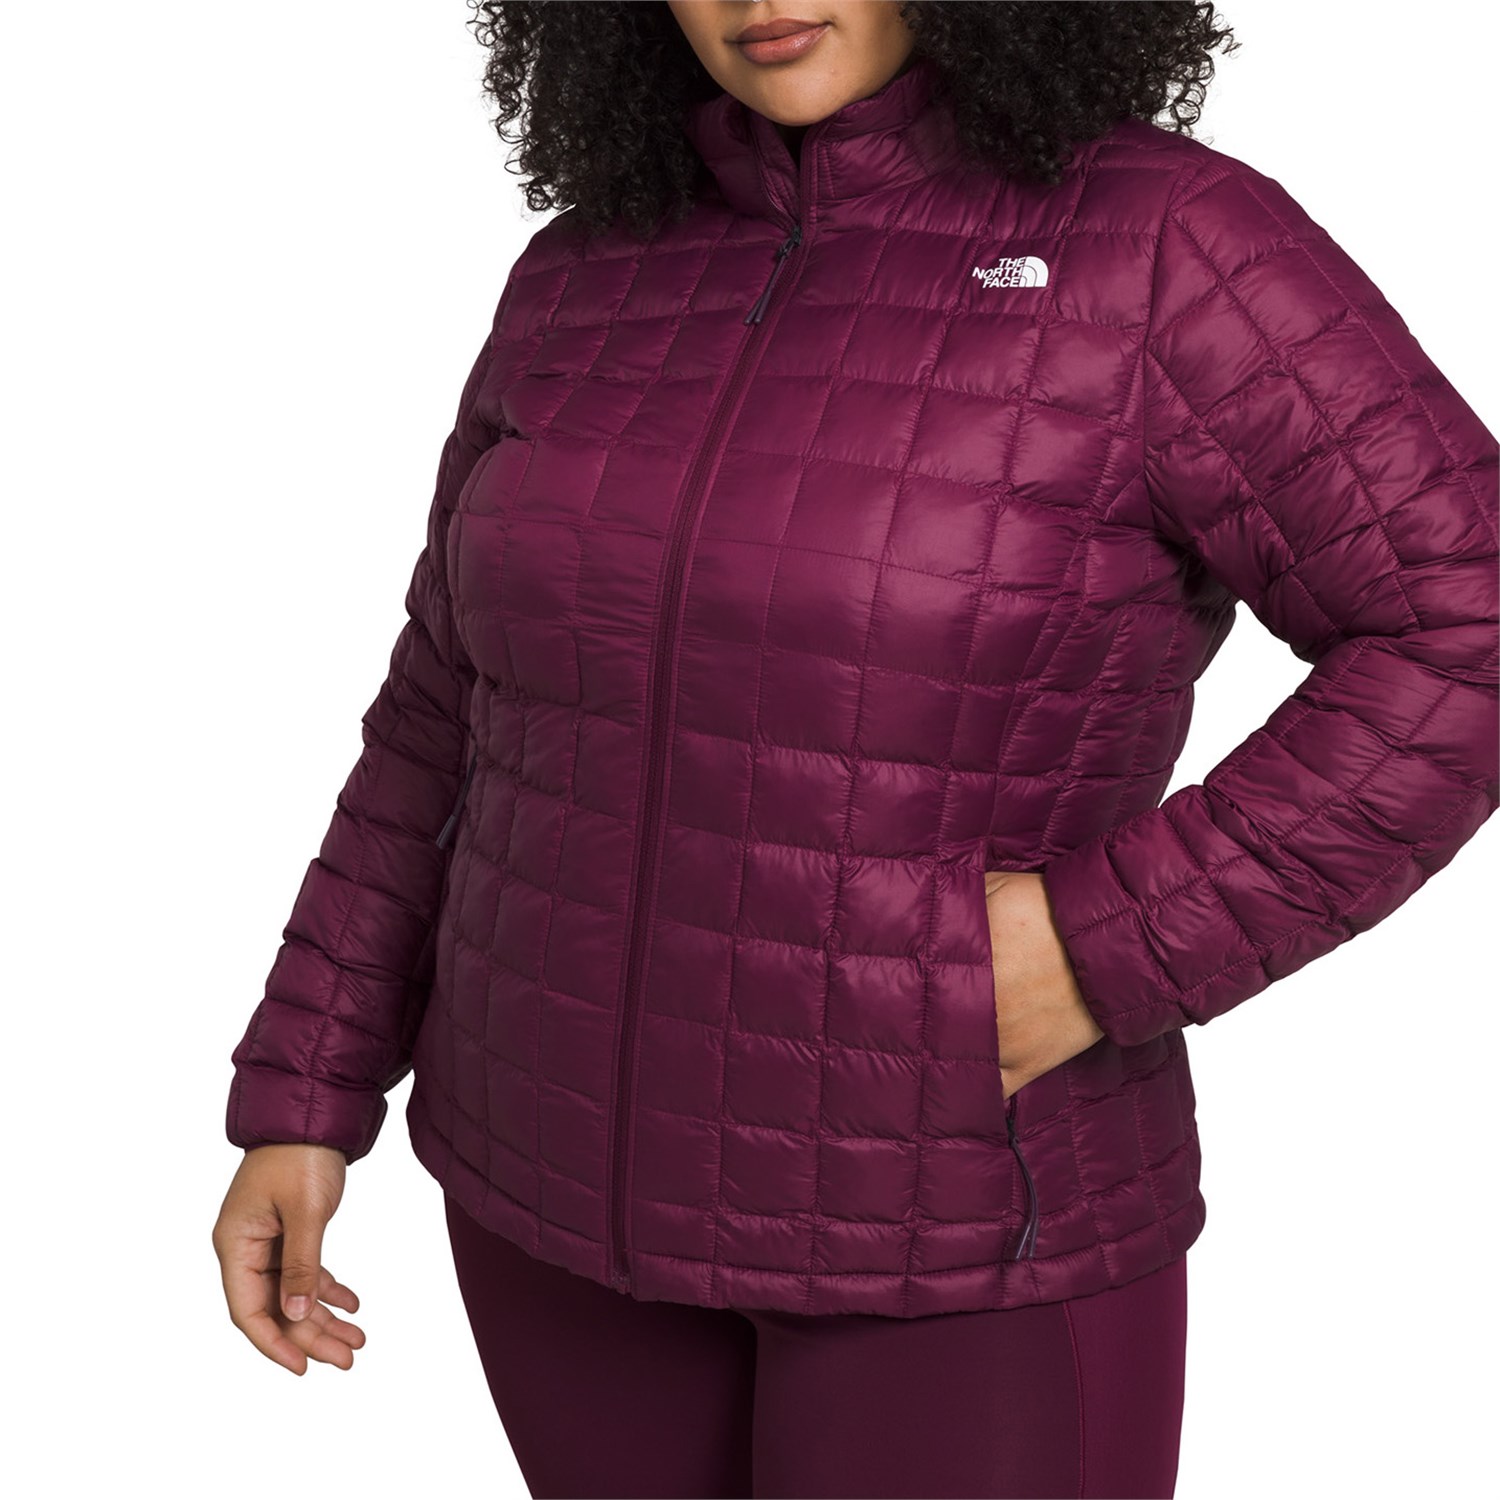 Куртка The North Face ThermoBall Eco 2.0 Plus, цвет Boysenberry куртка the north face thermoball hooded синий